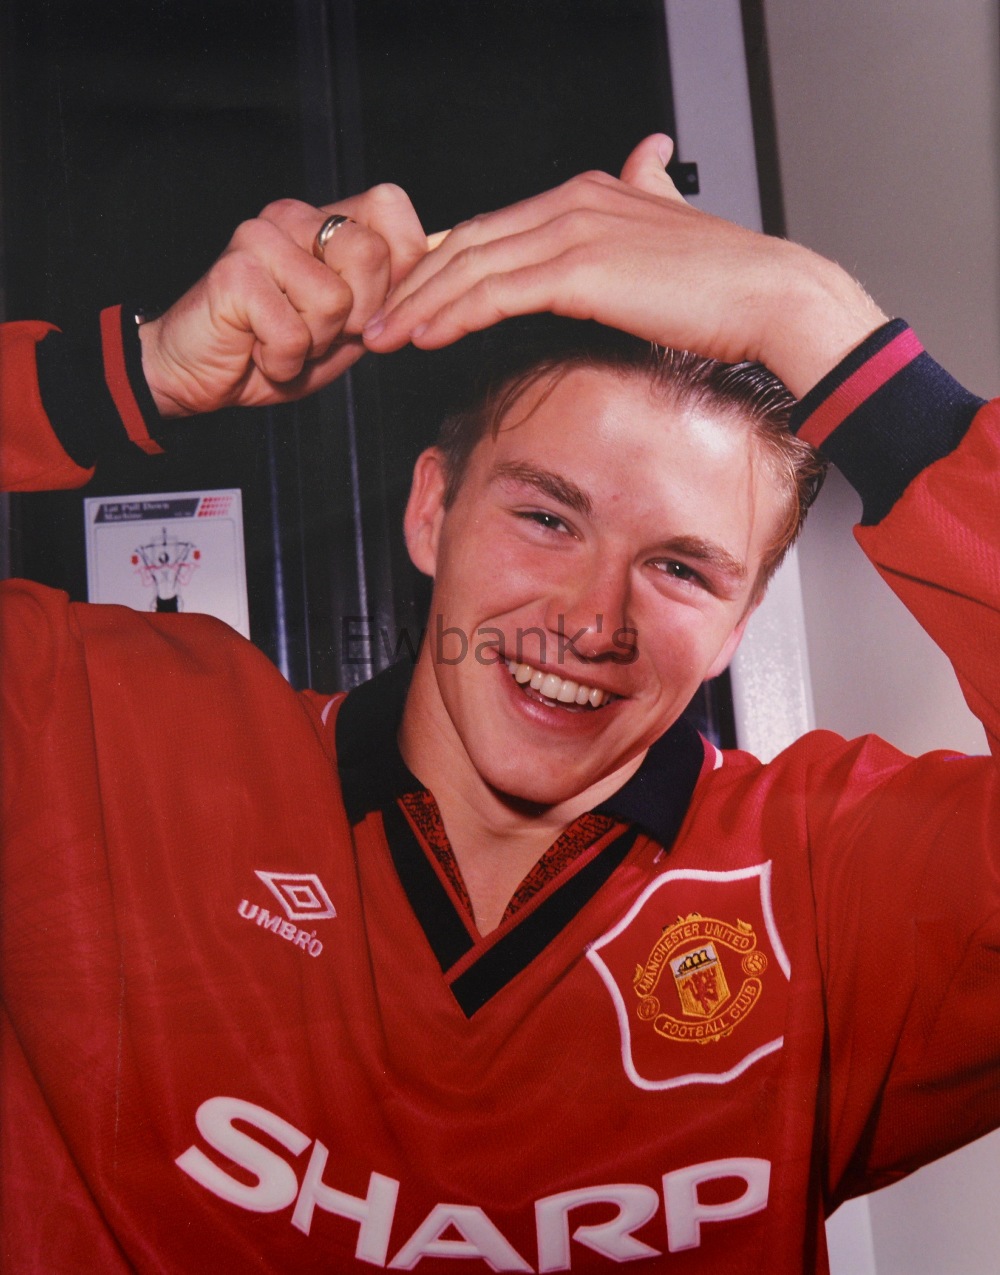 David Beckham, English Footballer, colour photograph taken in his early playing days at Manchester